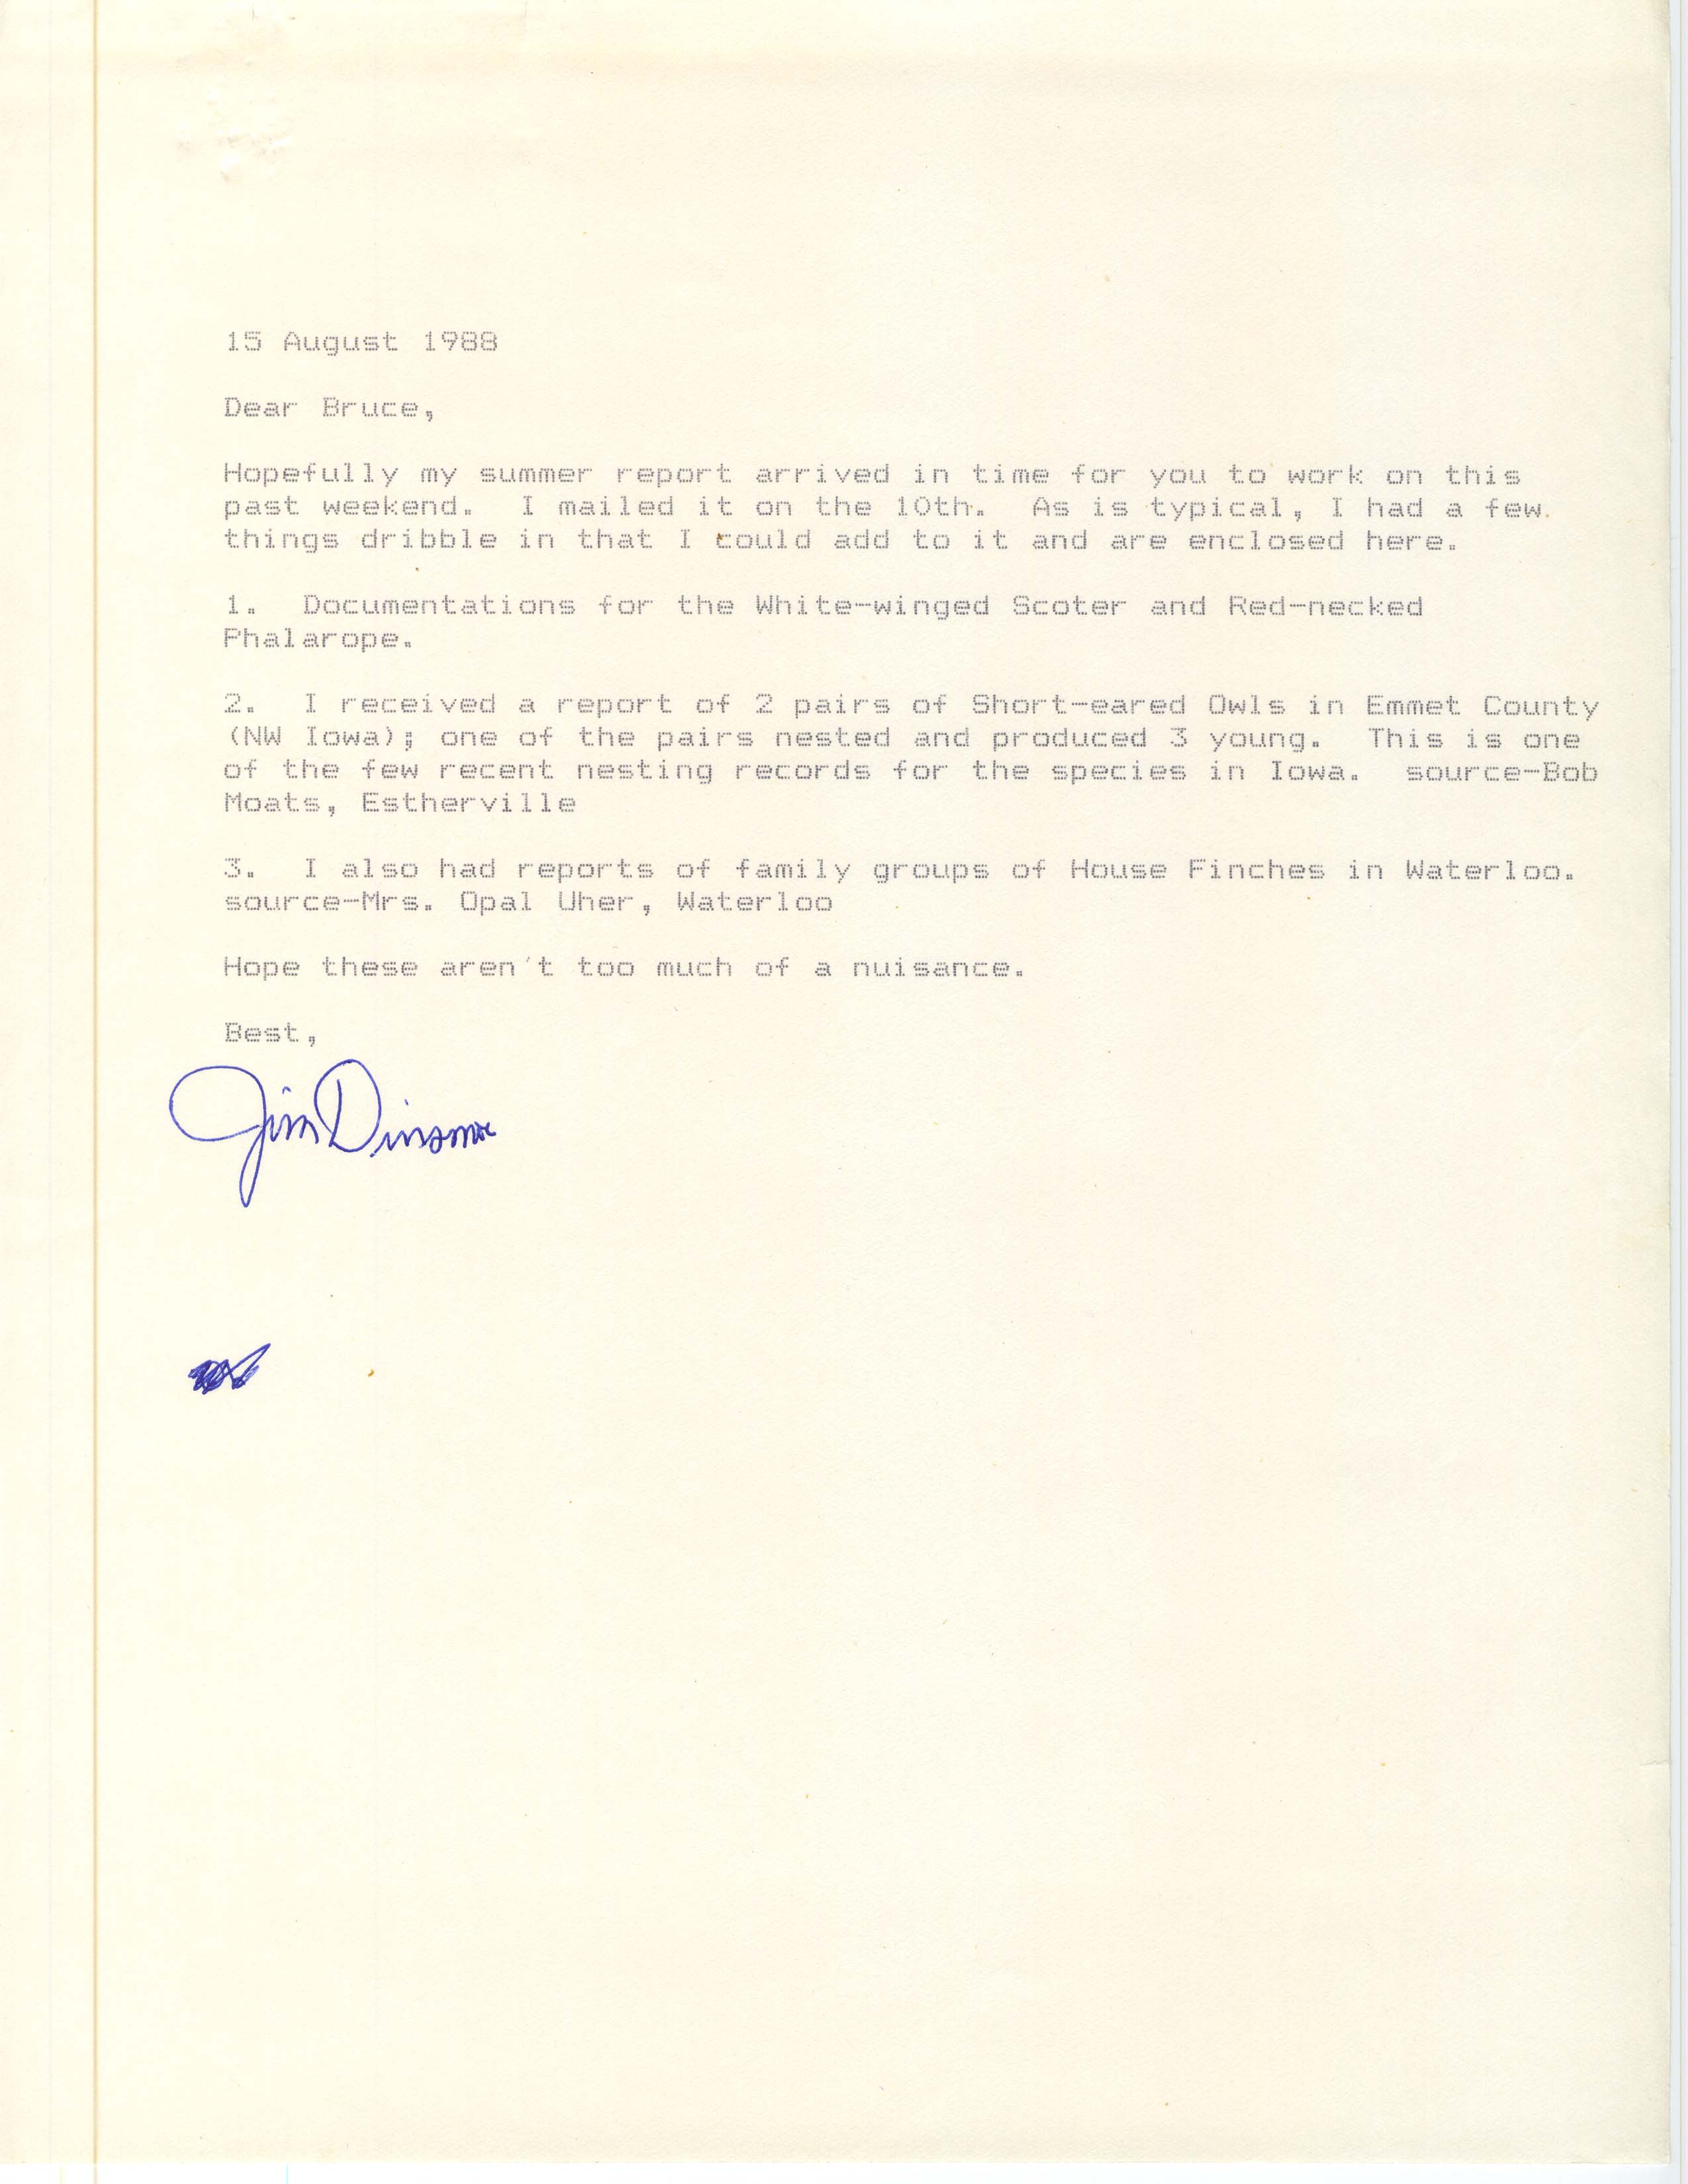 James J. Dinsmore letter to Bruce G. Peterjohn with additional summer bird sightings, August 15, 1988